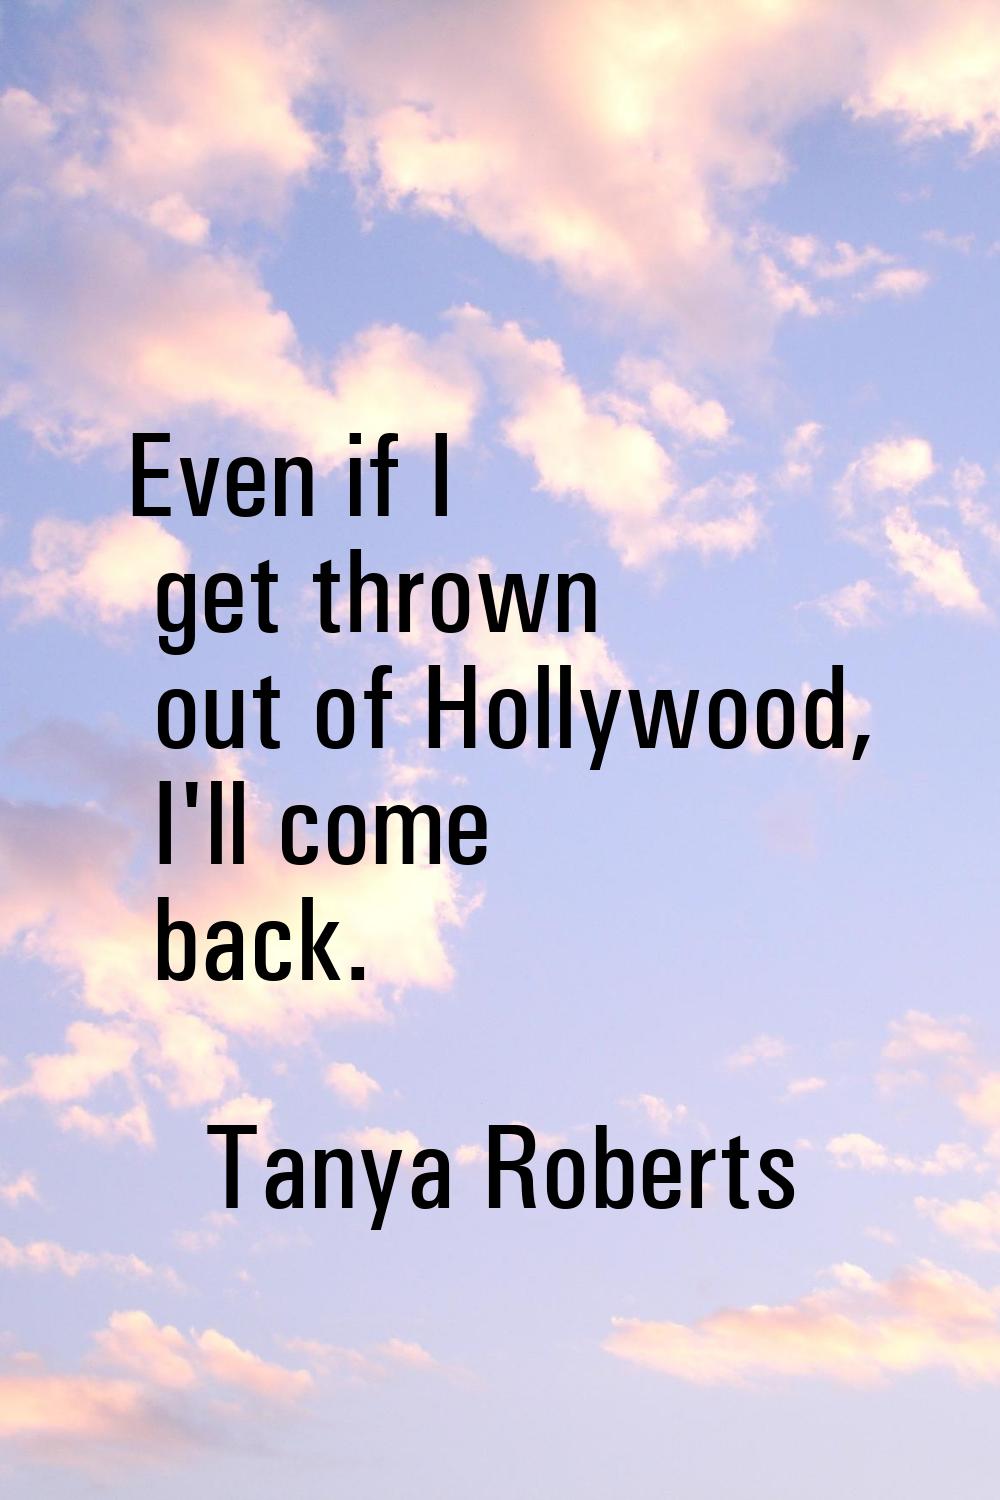 Even if I get thrown out of Hollywood, I'll come back.